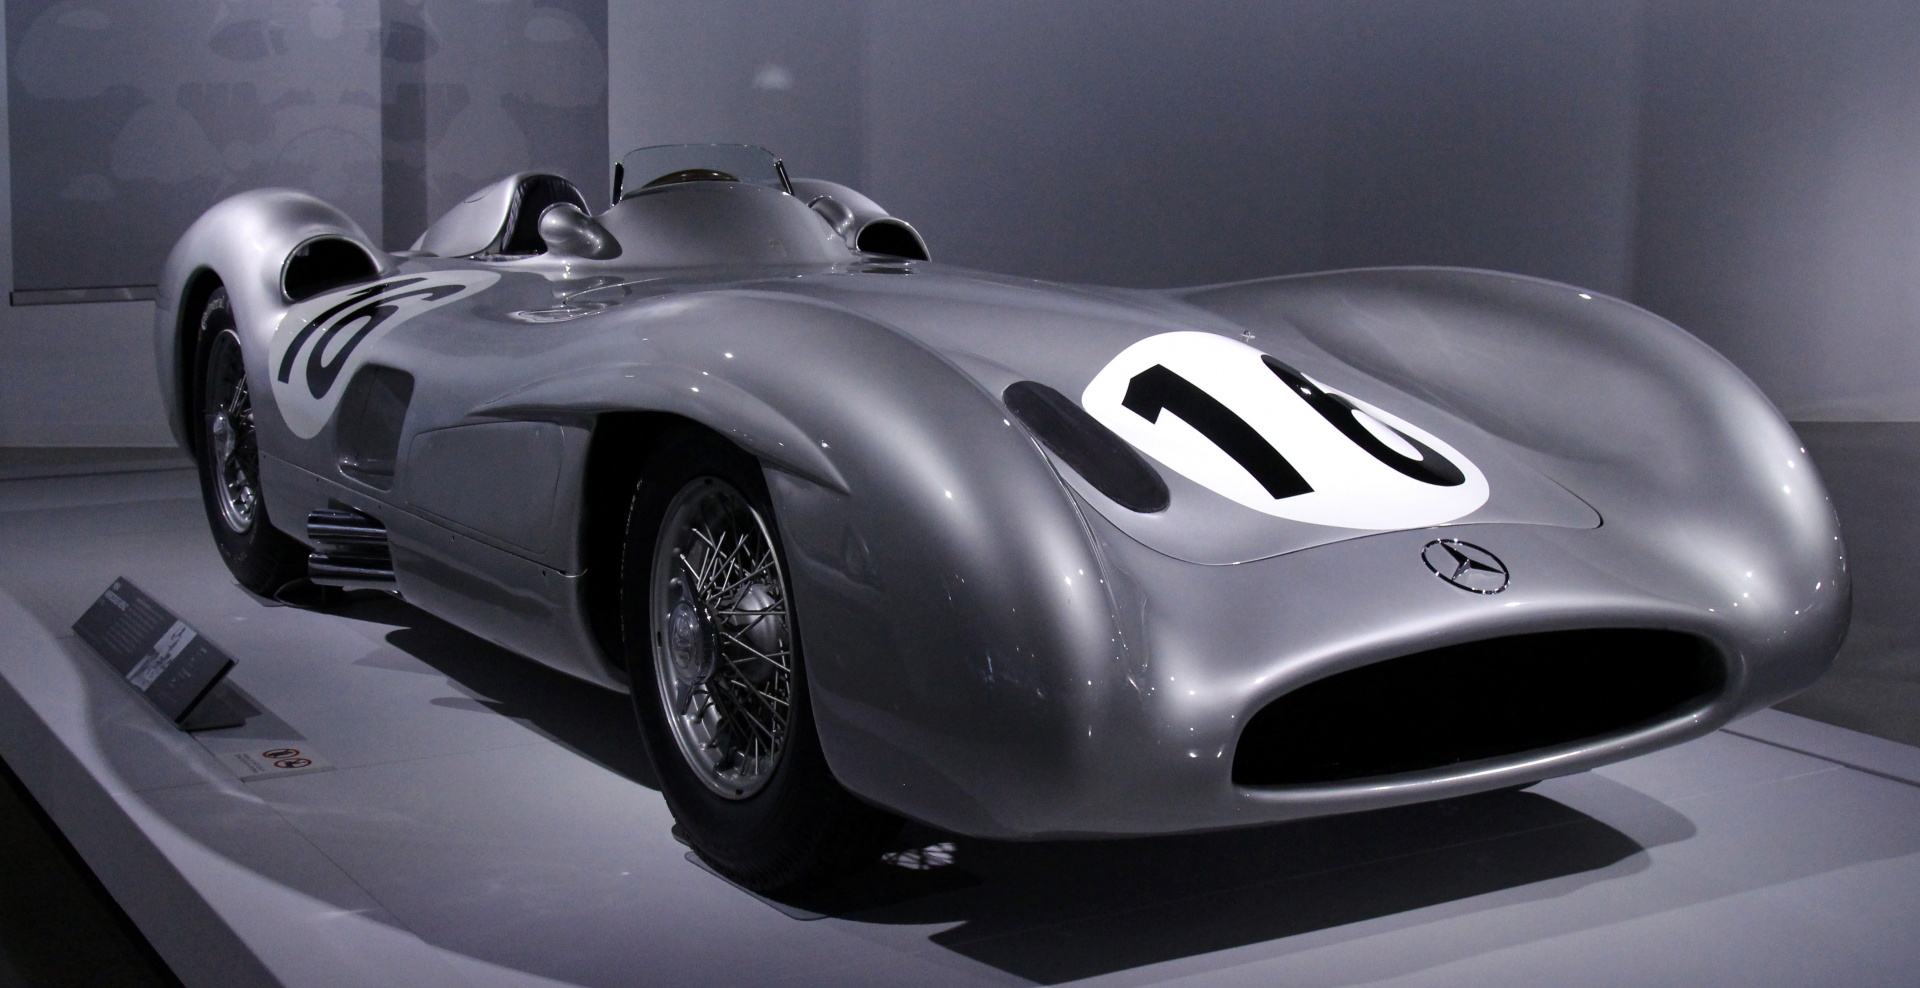 Top 10 Most Expensive Cars In The World - Of All Time